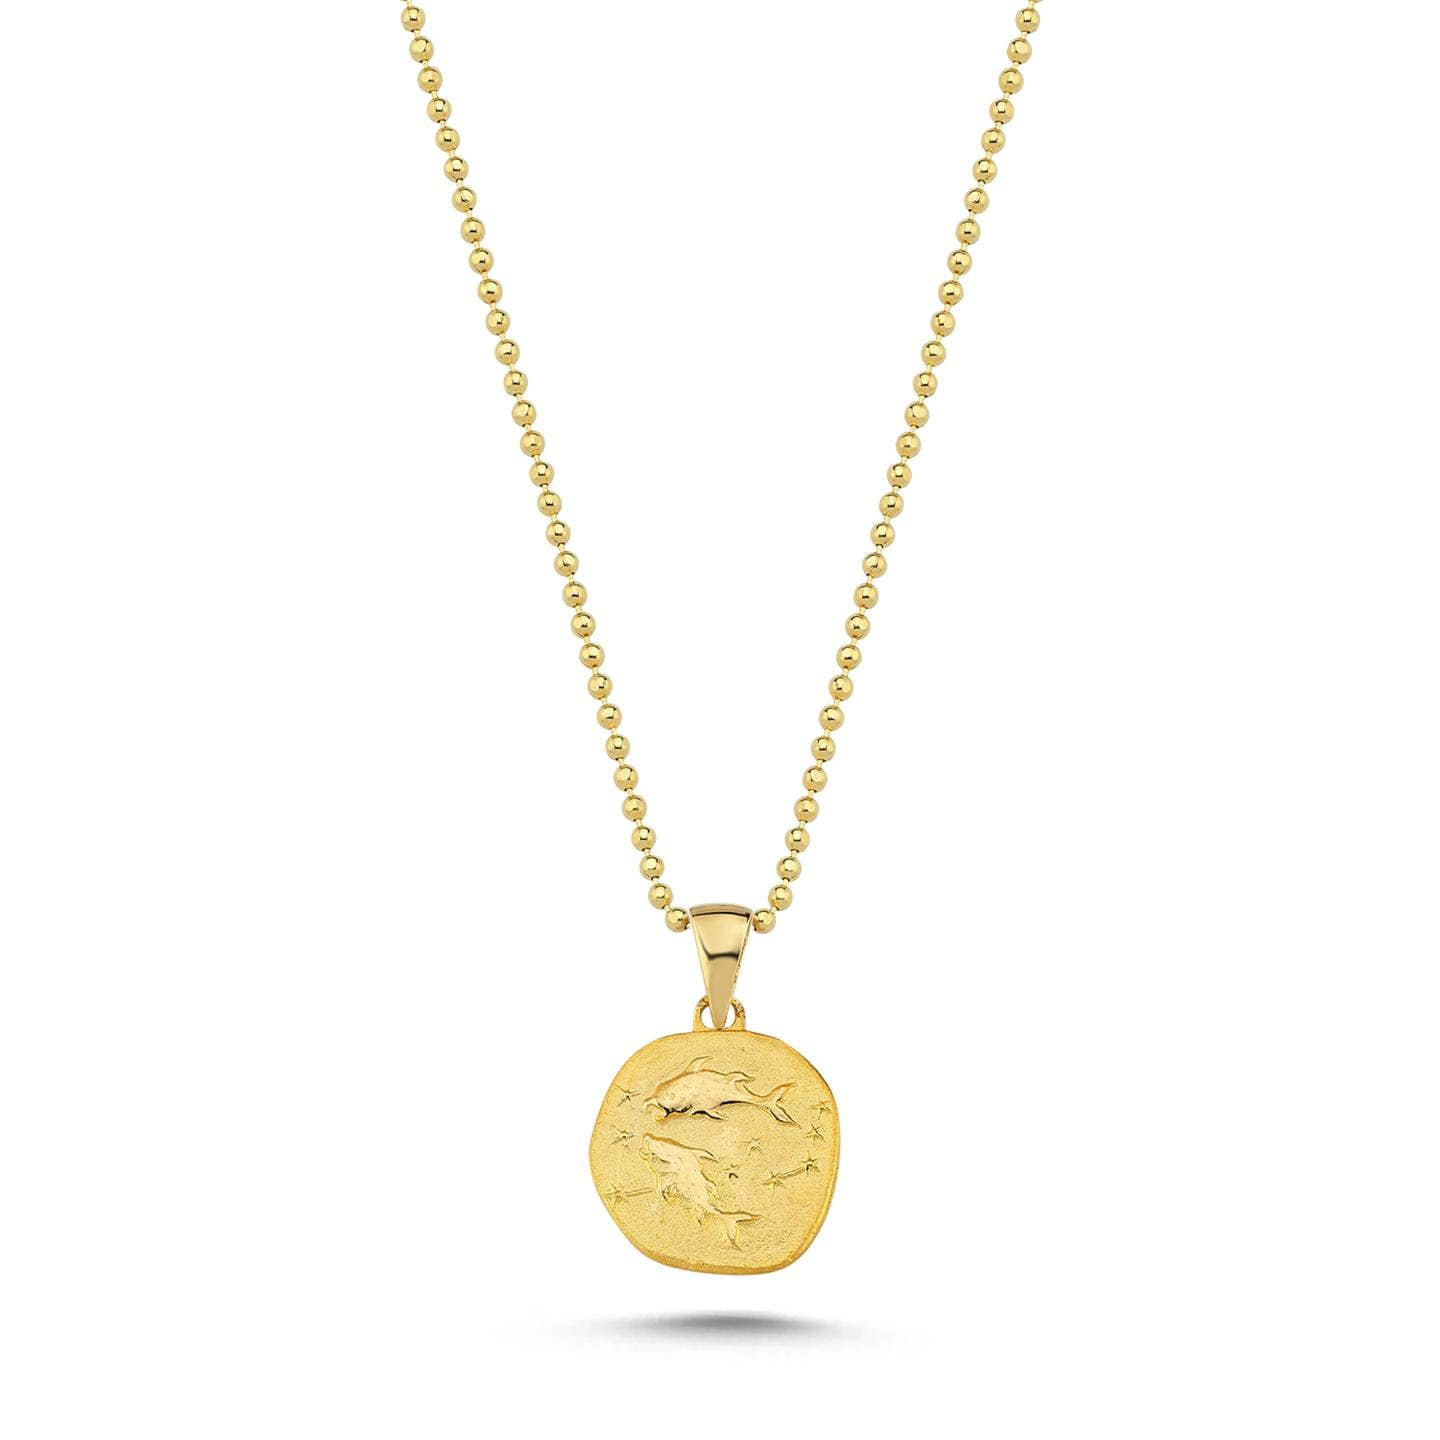 14K Gold Zodiac Pisces Necklace - Elegant Pisces Necklace - Perfect Gift for Astrology Lovers